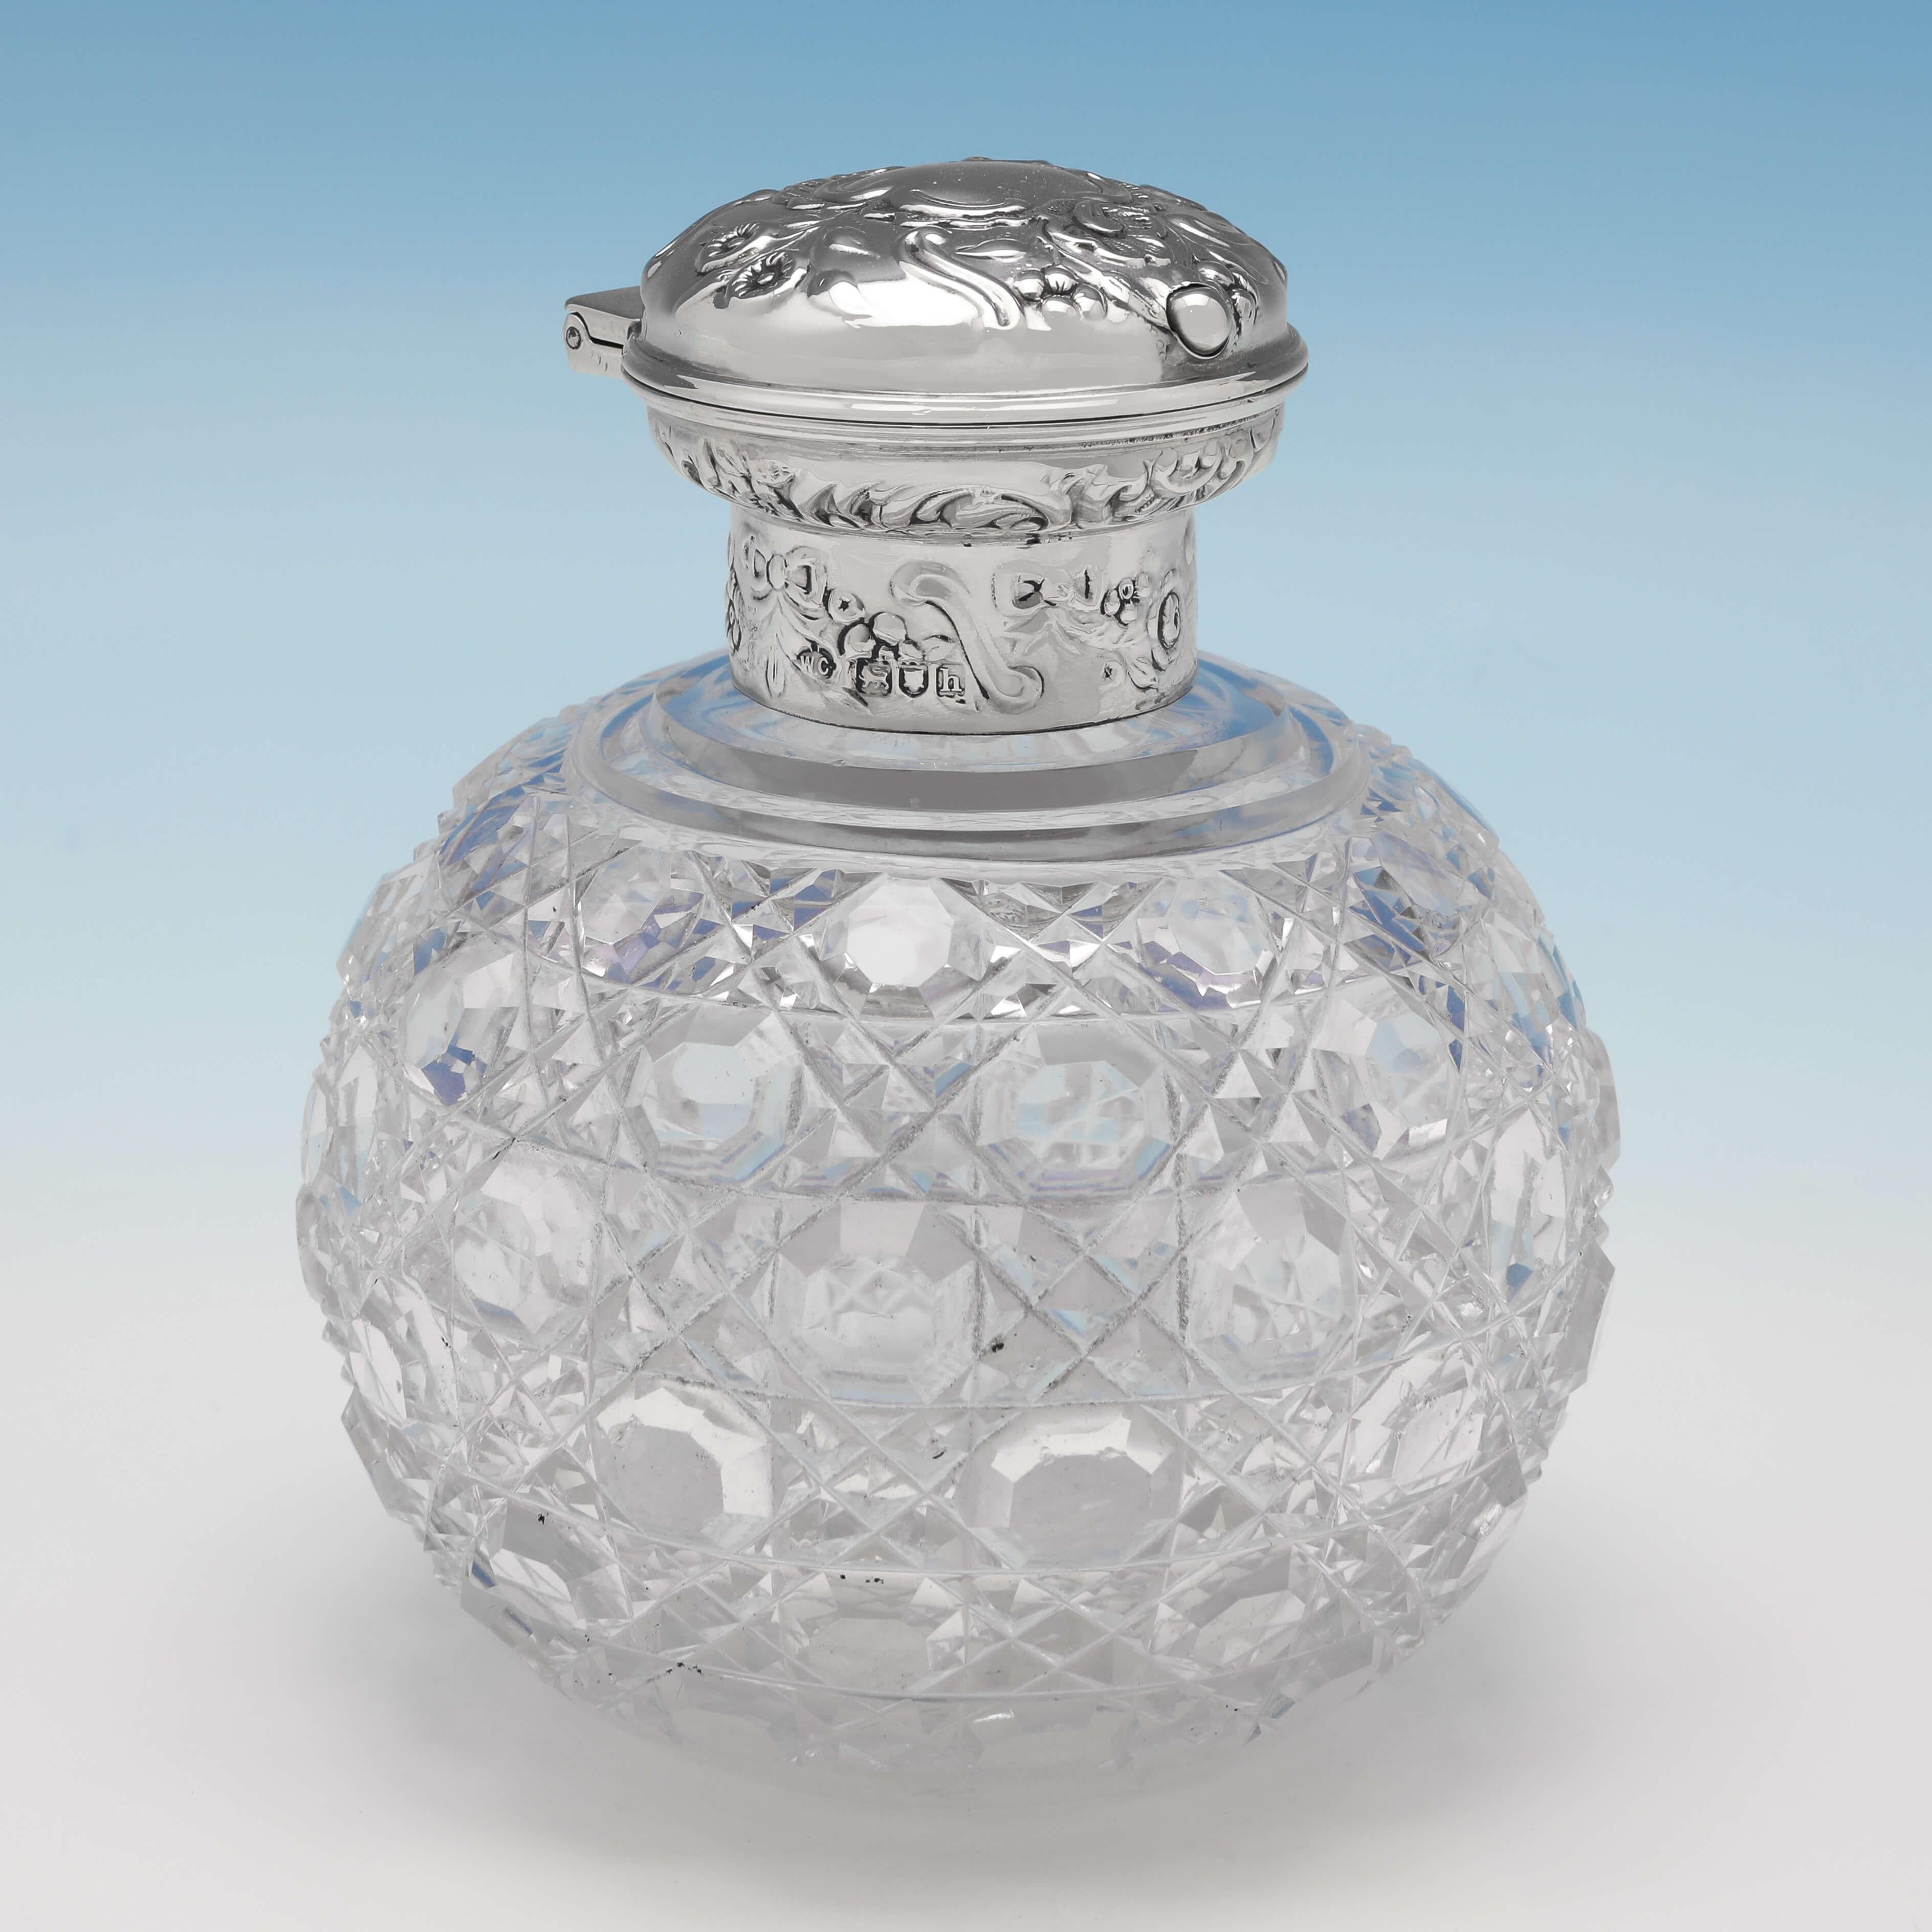 Hallmarked in London in 1903 by William Comyns, this very attractive pair of Antique Sterling Silver Scent Bottles, feature traditional cut glass bodies, and ornate lids which open via push buttons. Each scent bottle measures 4.75